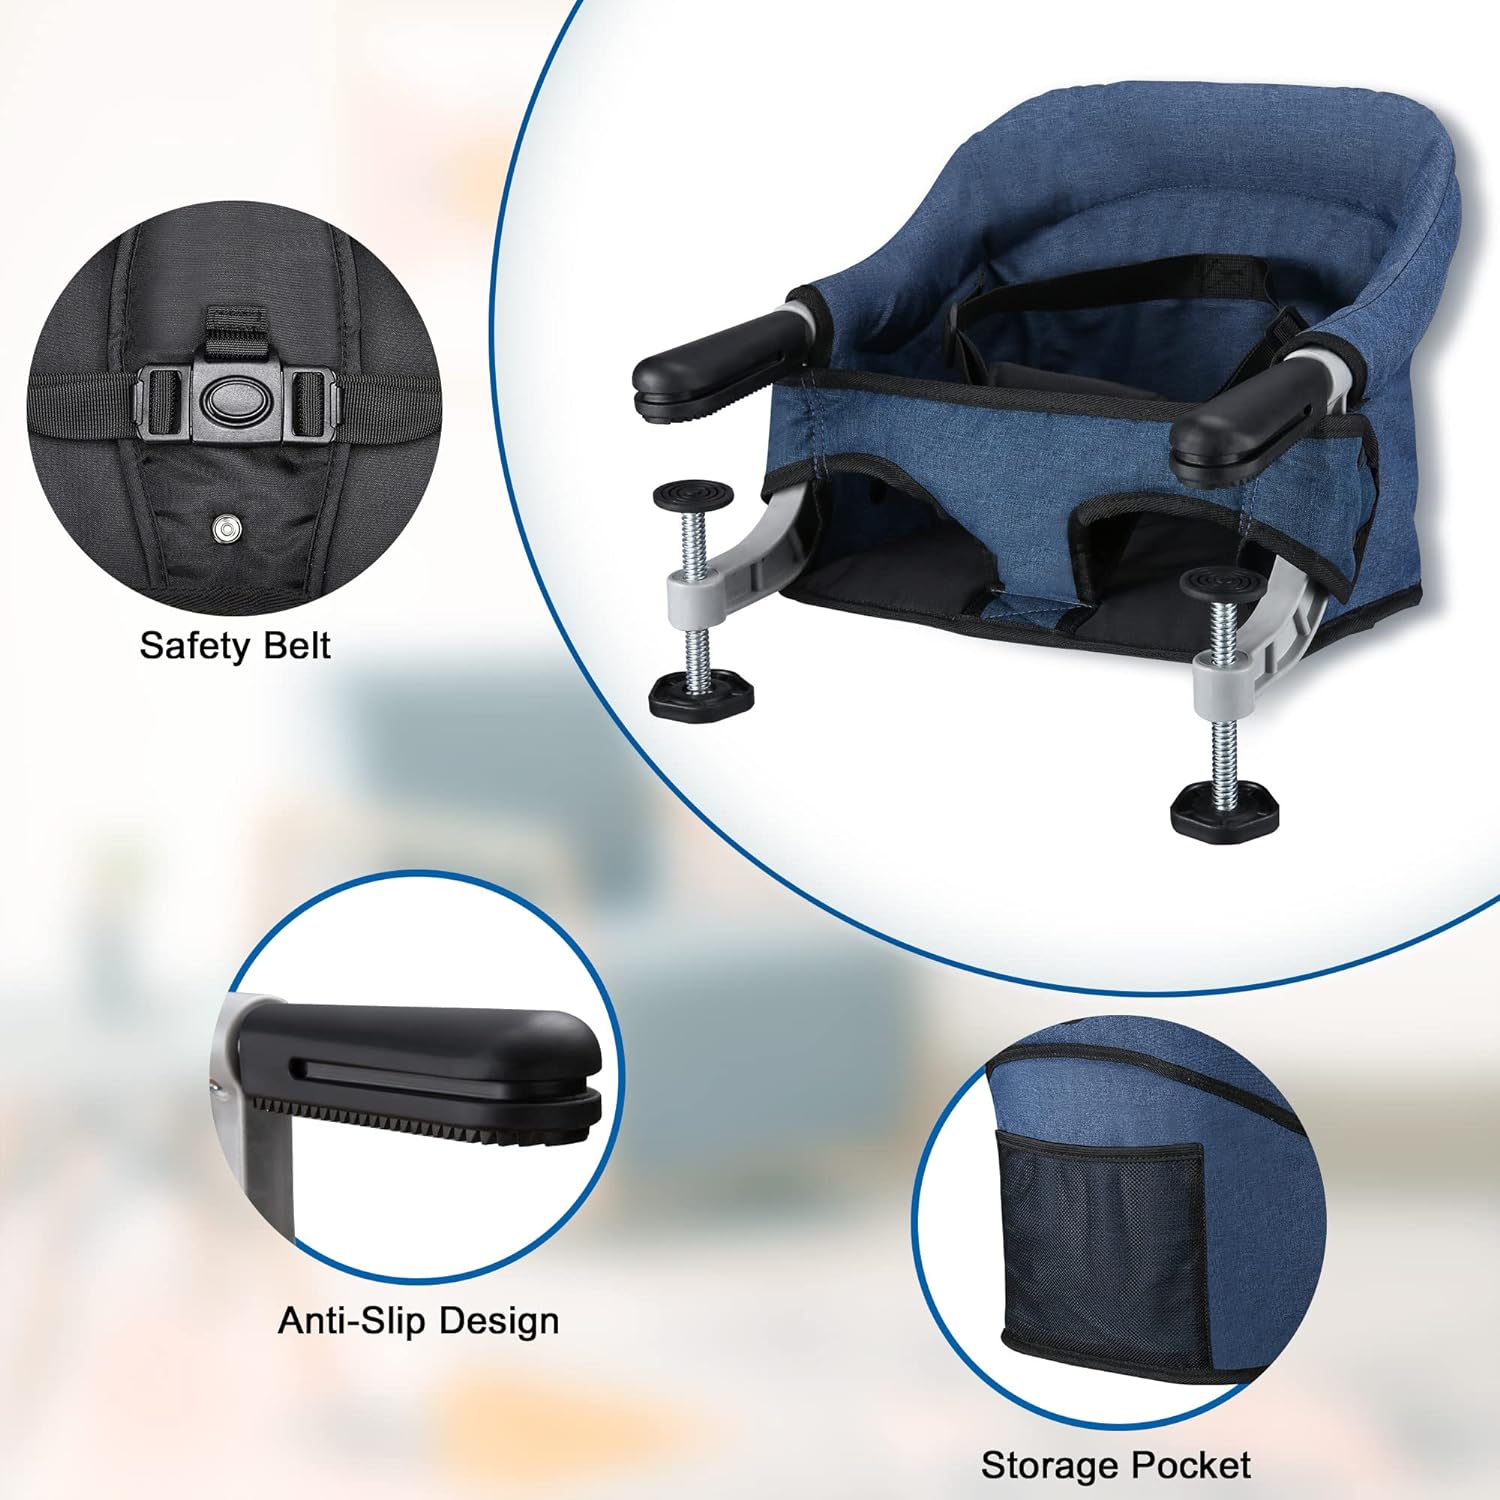 Is This the Most Versatile Booster Seat for Active Families: Introducing the Veeyoo Portable High Chair